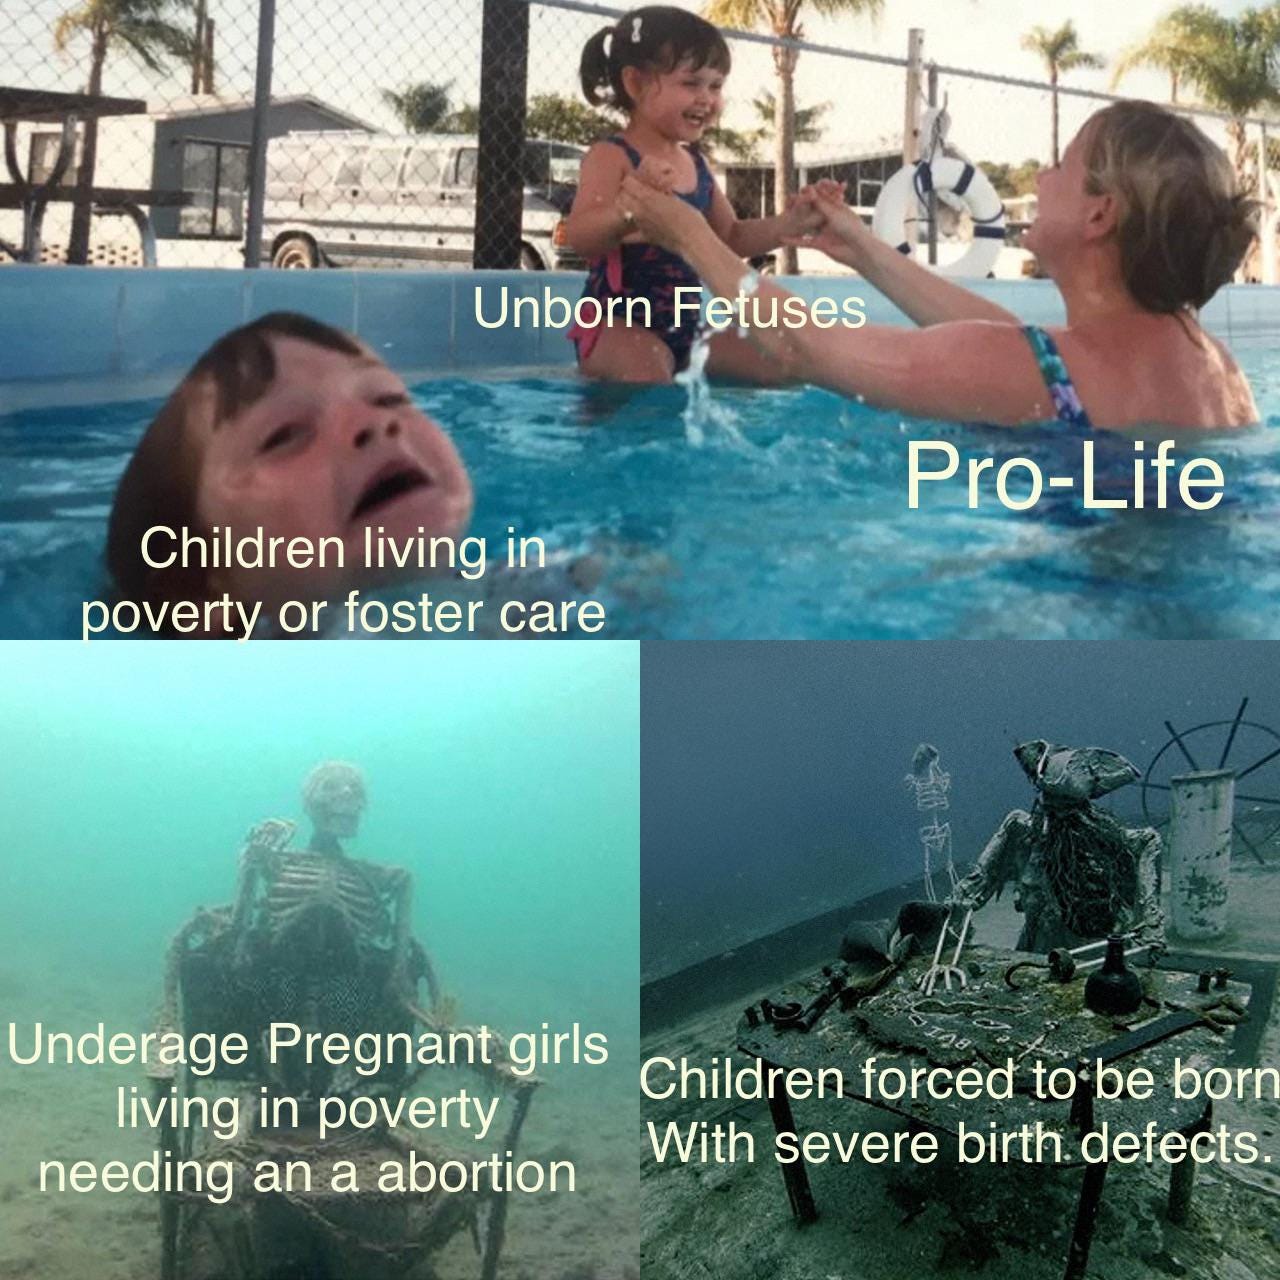 four pictures showing different stages of drowning with captions describing how the GOP is not actually "pro-life" toward children